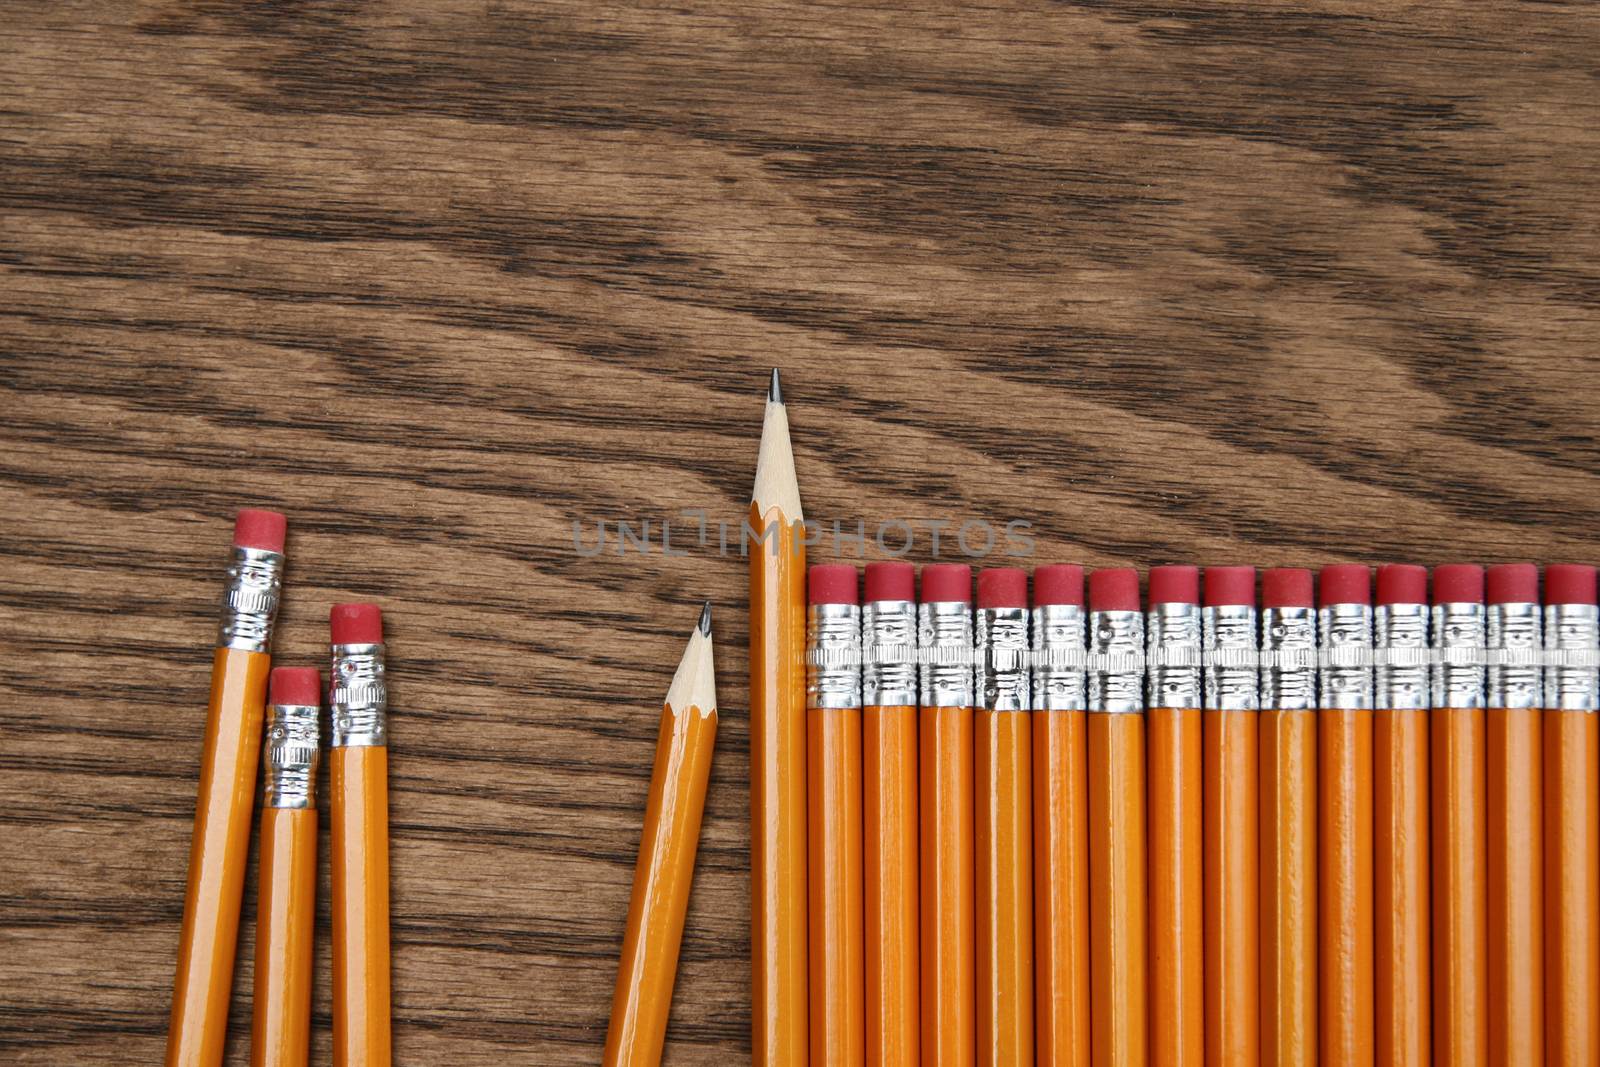 A row of red pencils on wood surface by Sandralise